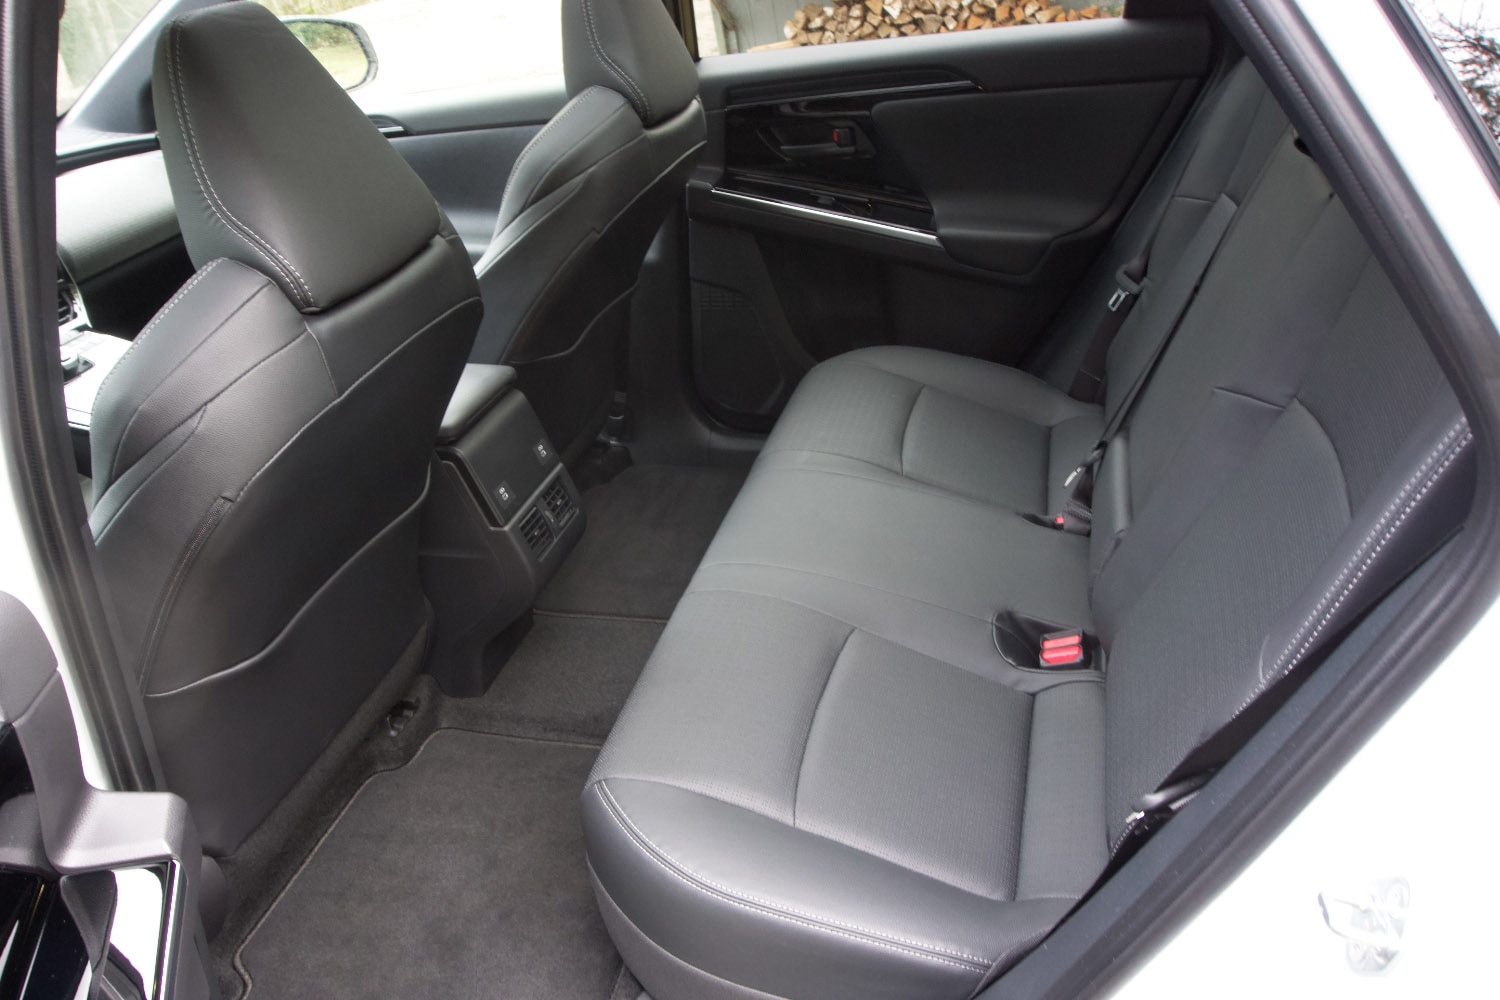 2023 Toyota bZ4X rear seating area